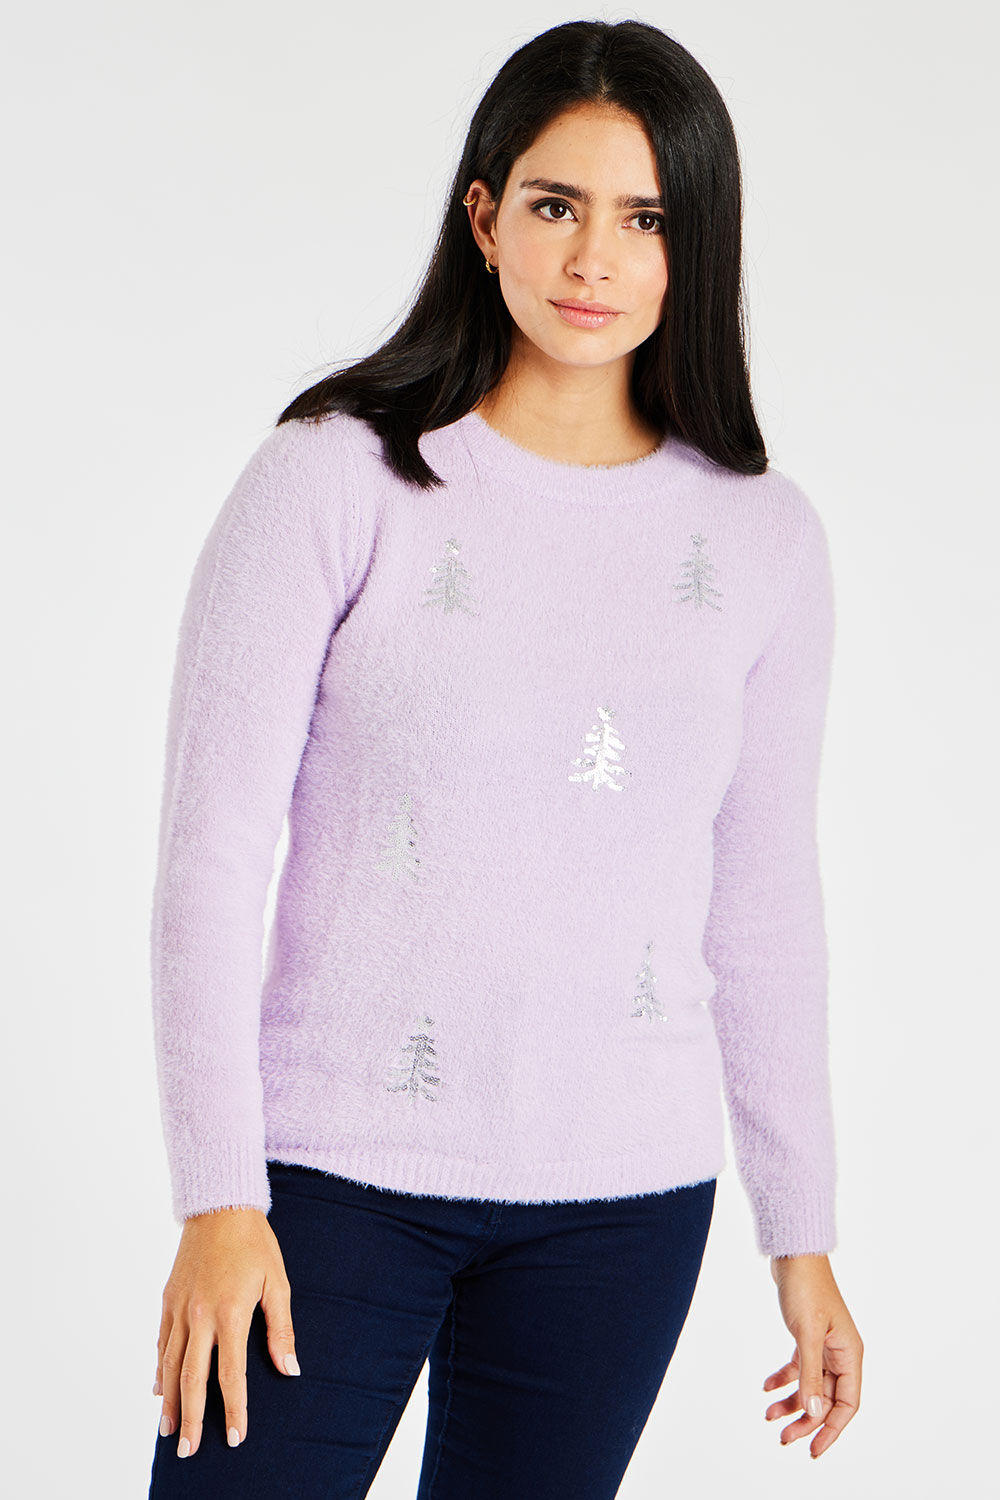 Bonmarche Lilac Fluffy Sequin Christmas Tree Jumper, Size: 28